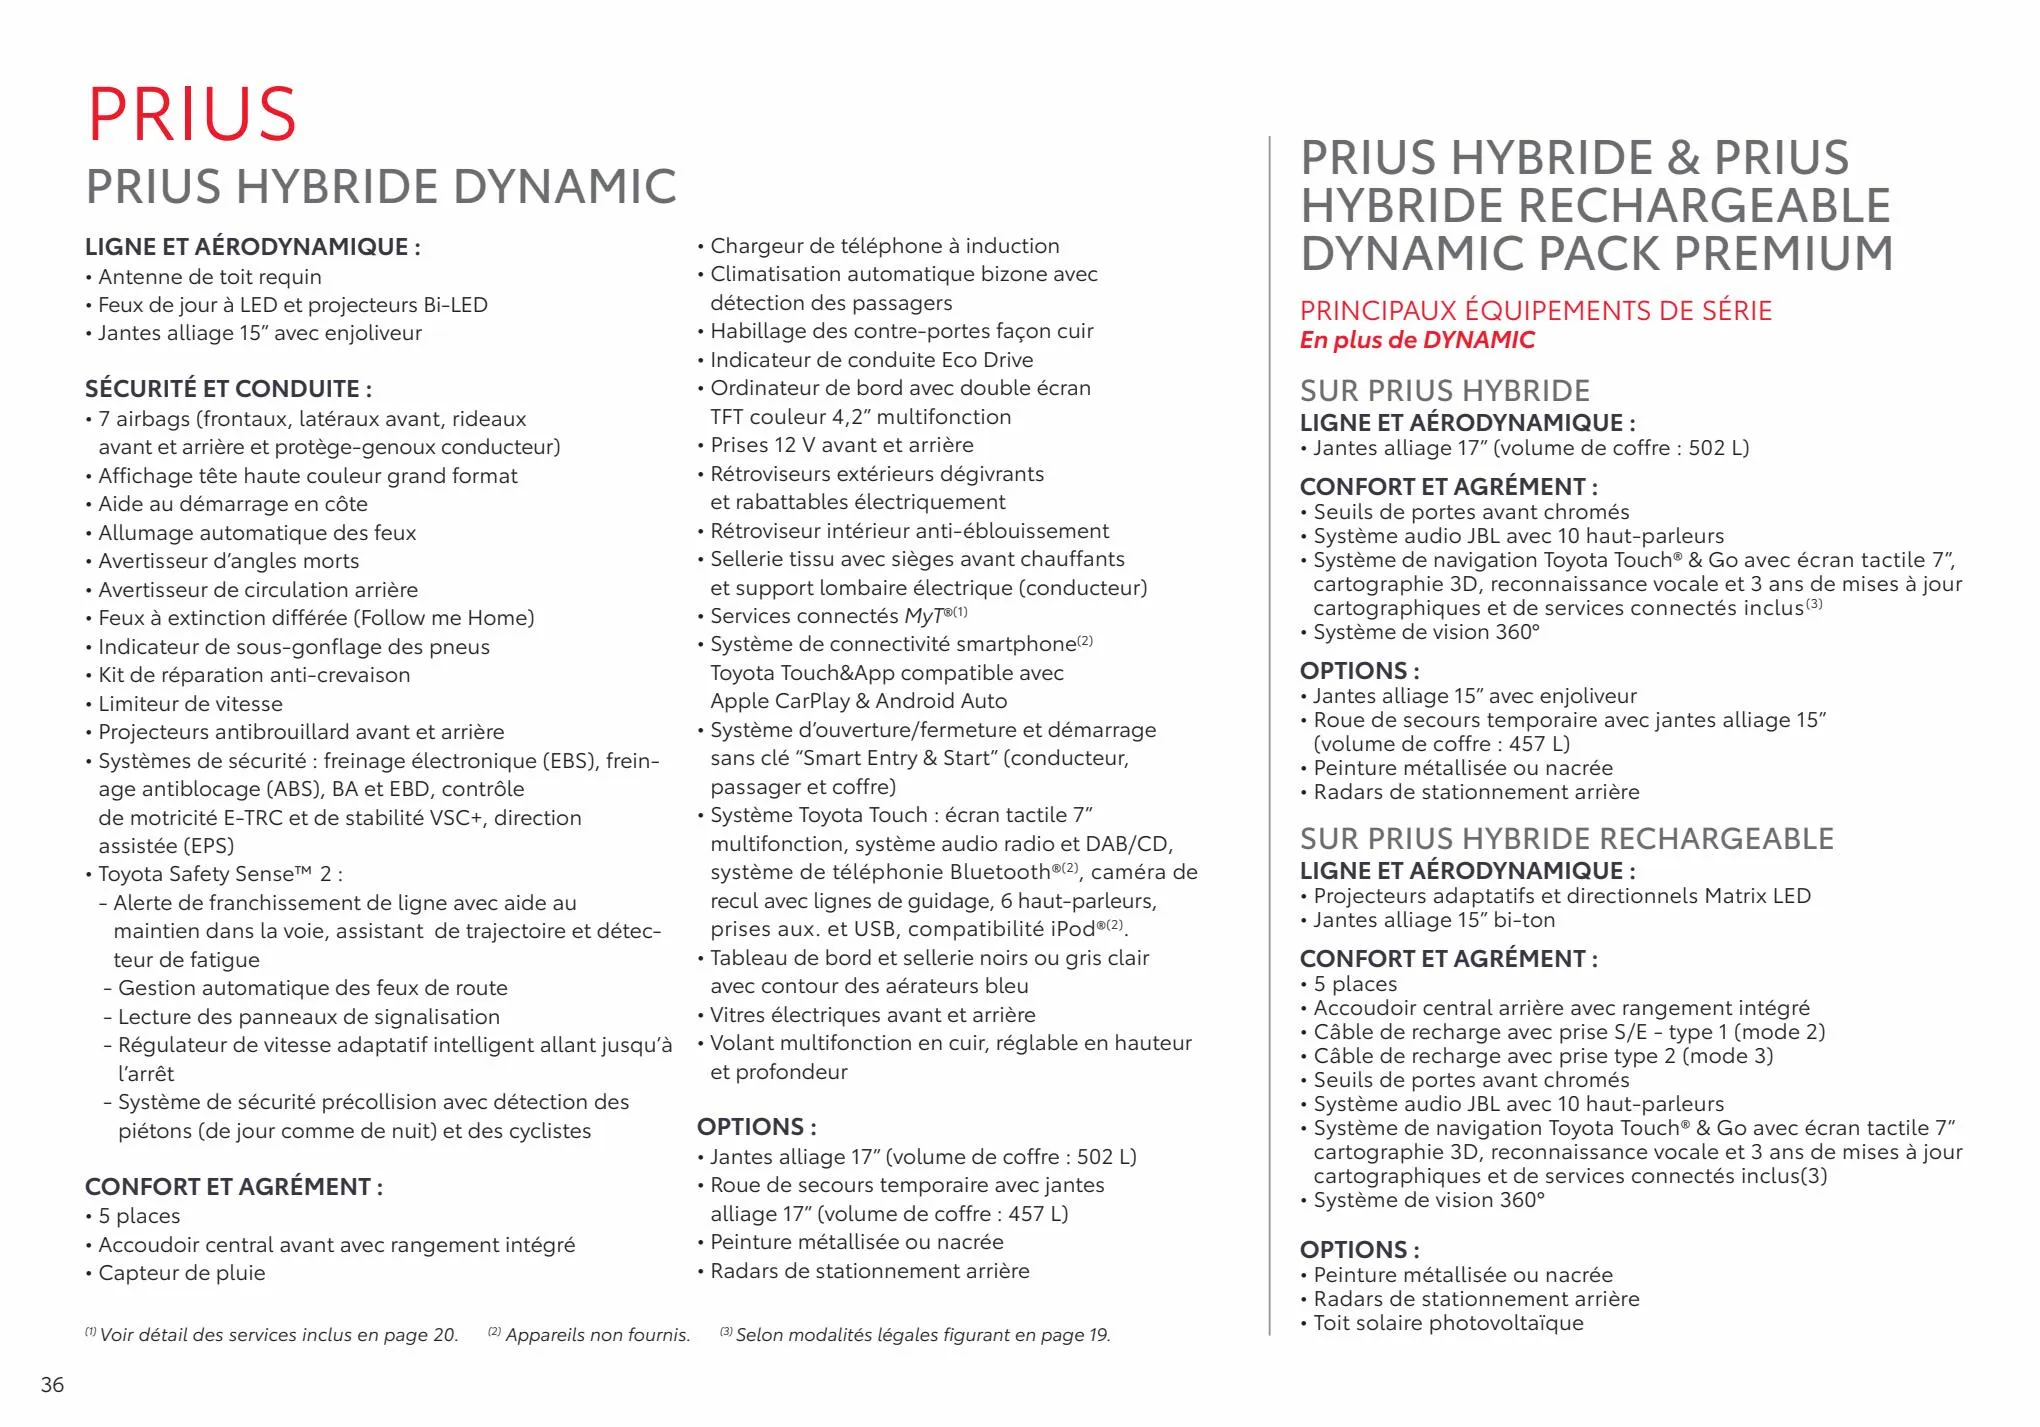 Catalogue Prius Hybride Rechargeable, page 00036